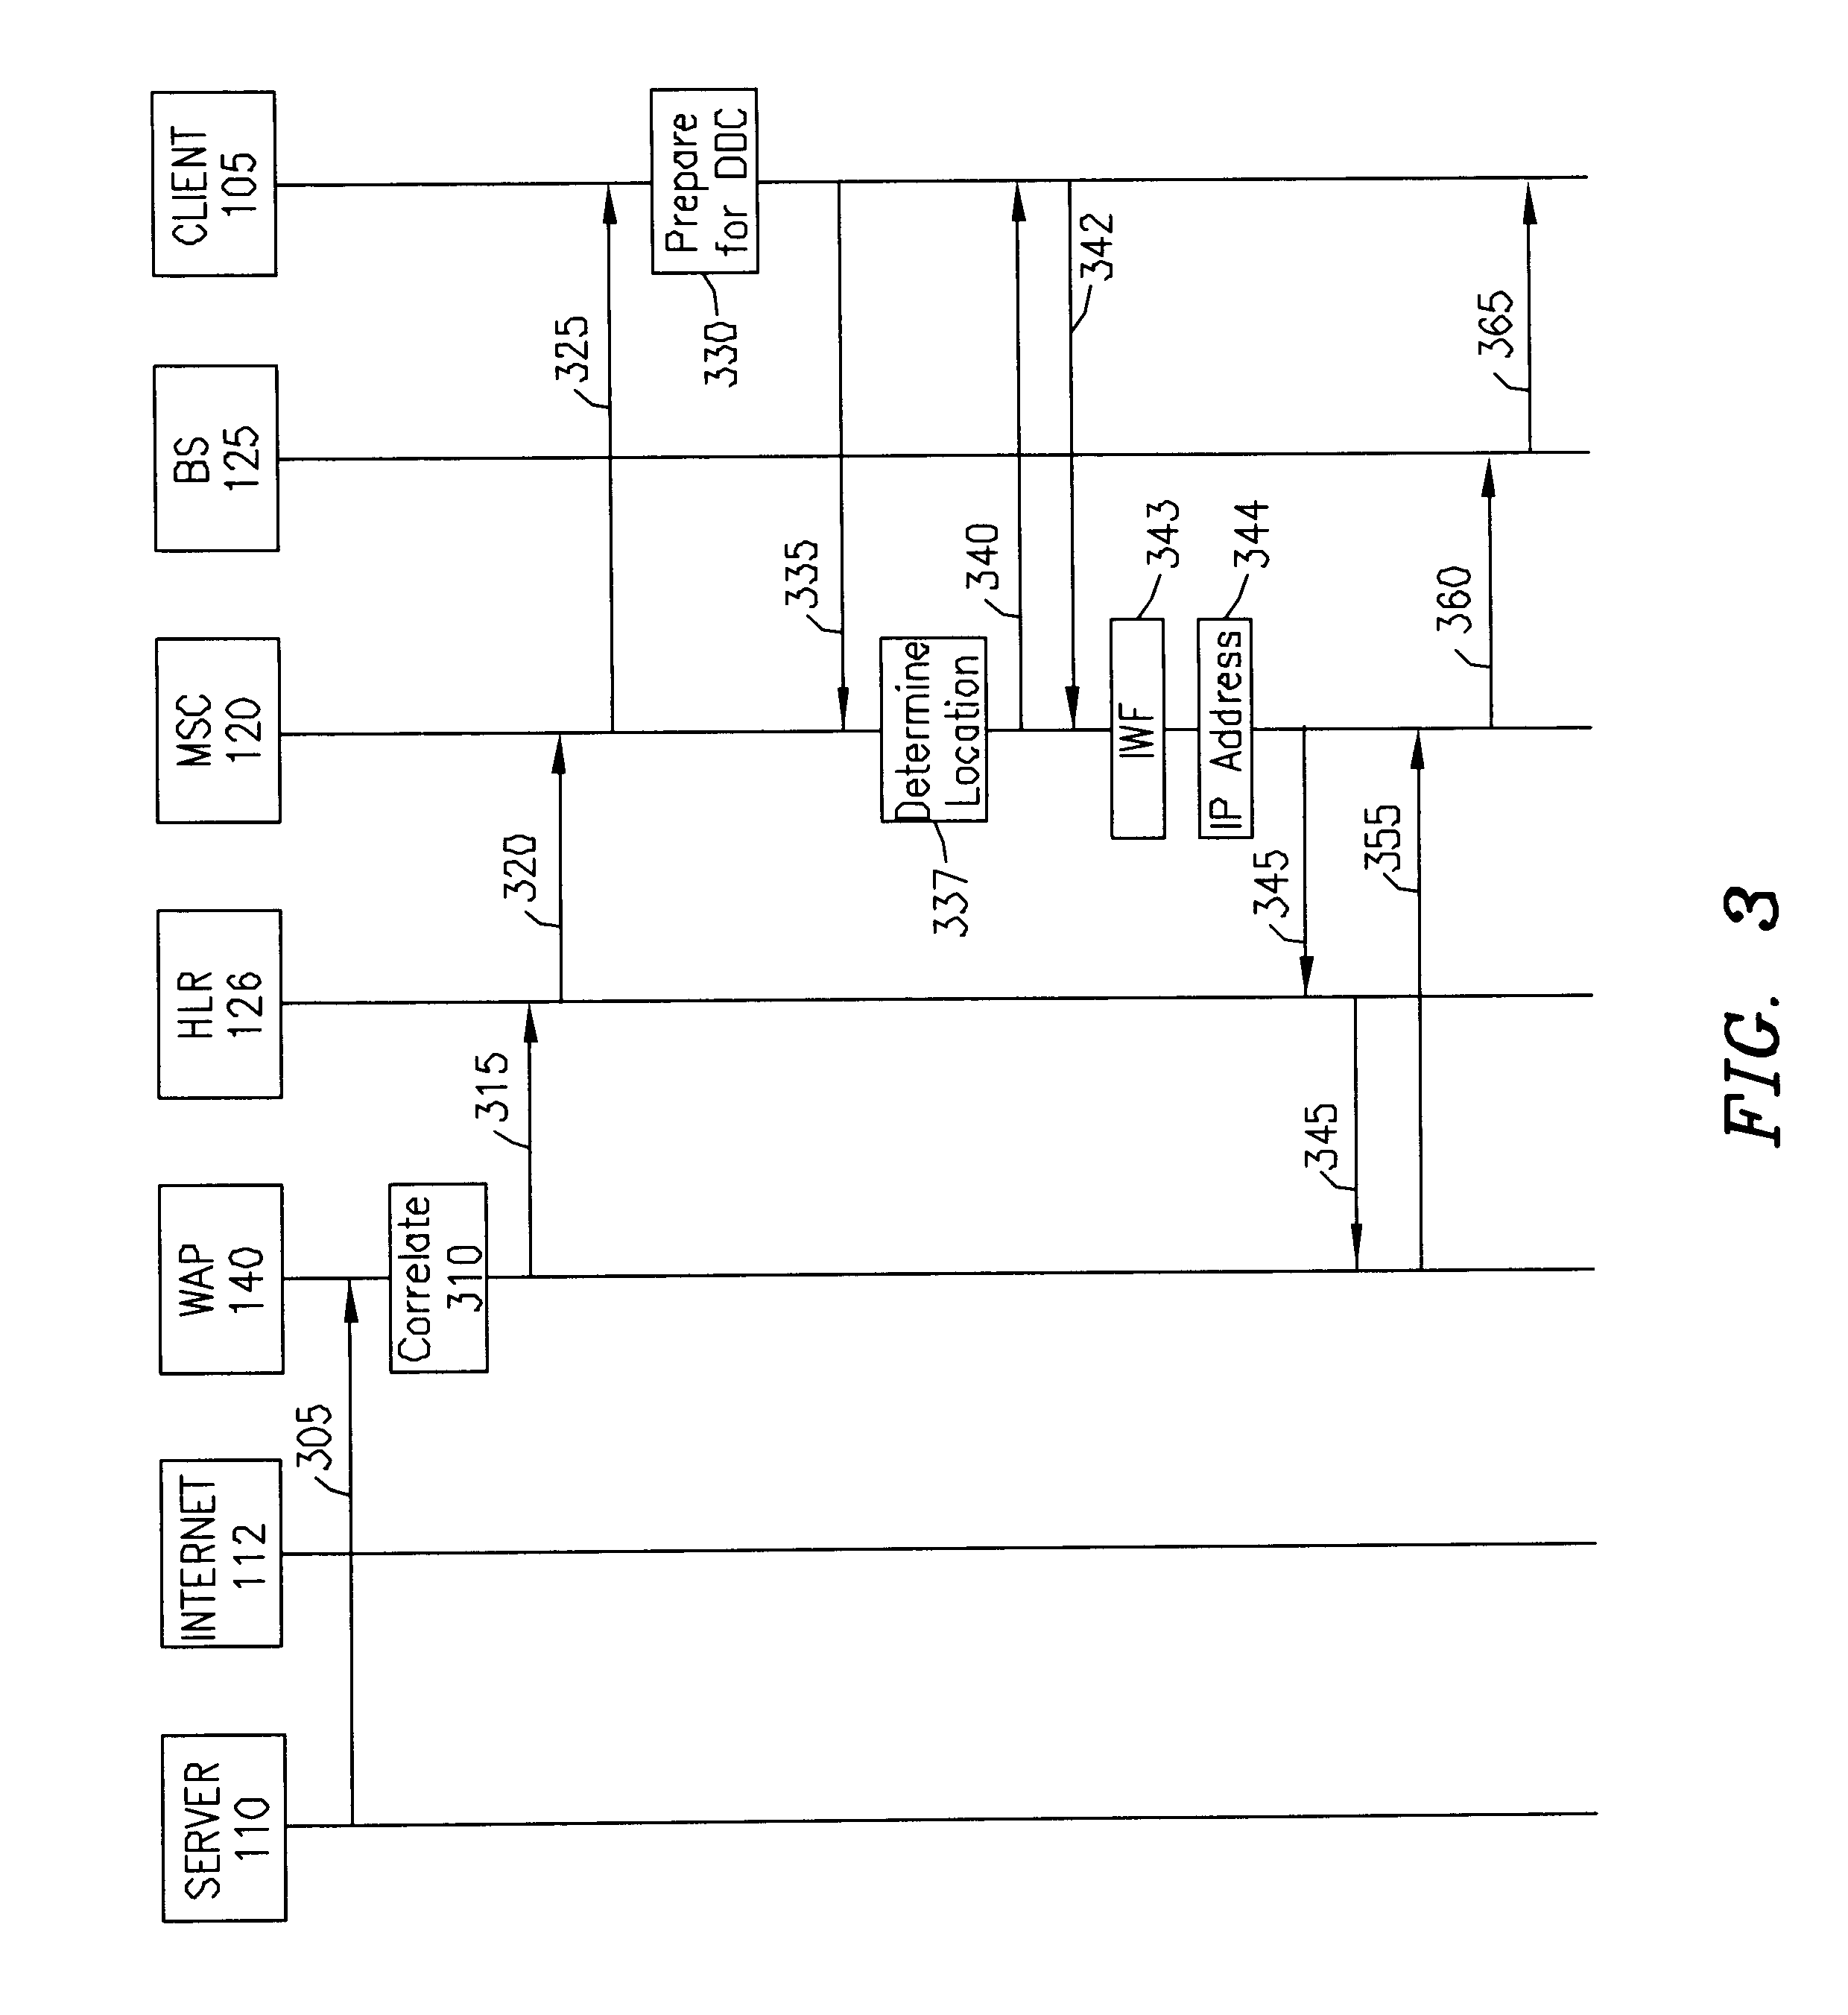 System, method, and apparatus for pushing data in a direct digital call environment